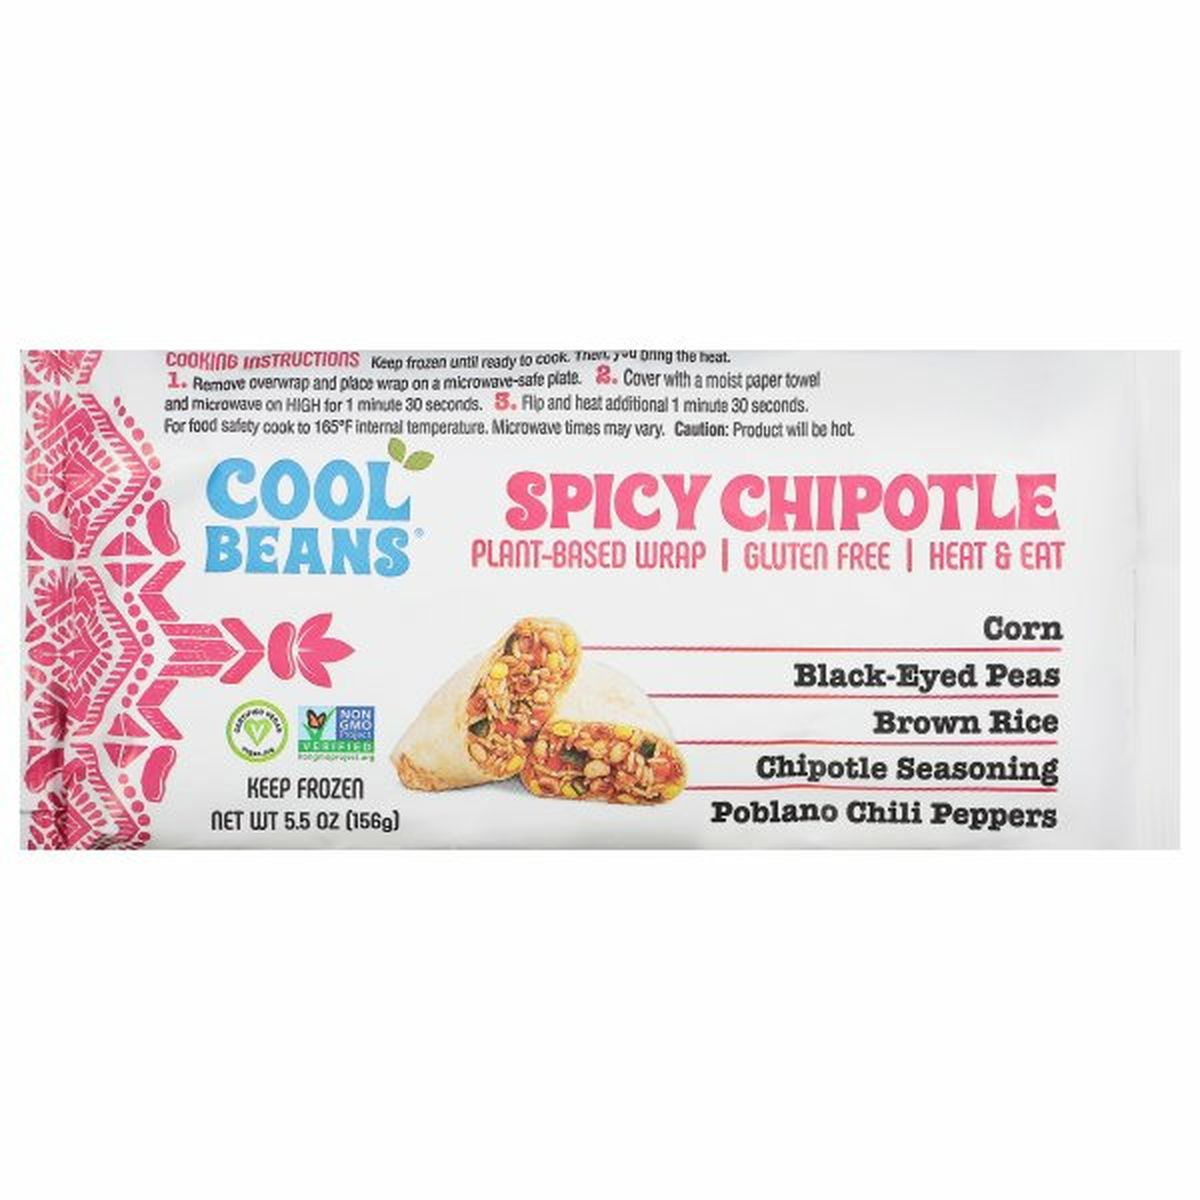 Calories in Cool Beans Plant-Based Wrap, Spicy Chipotle